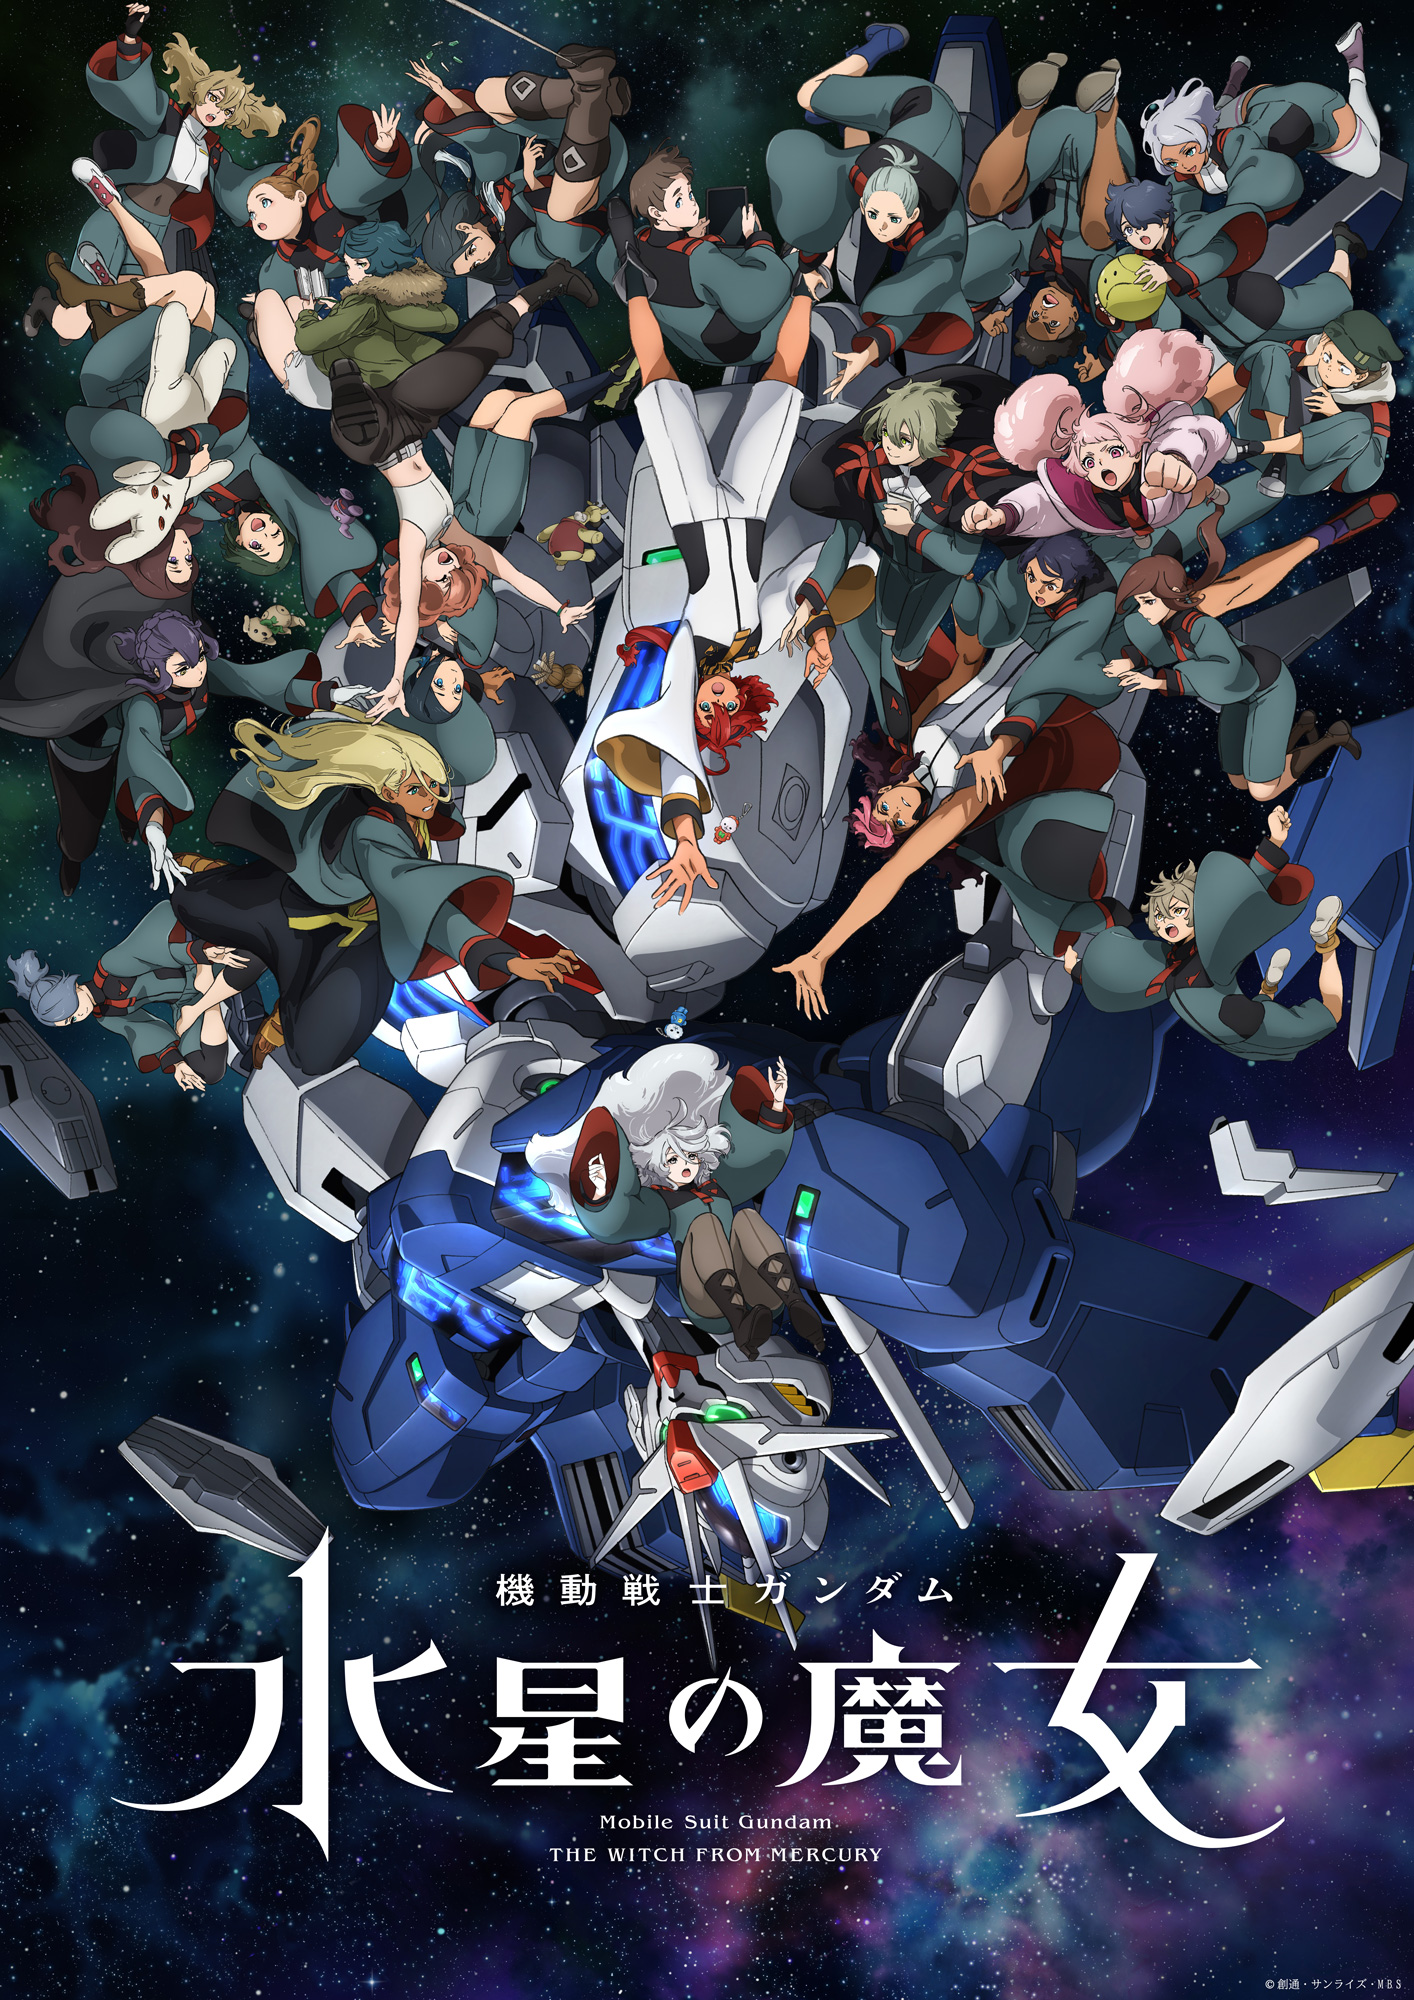 Mobile Suit Gundam: The Witch from Mercury Season 2 key visual